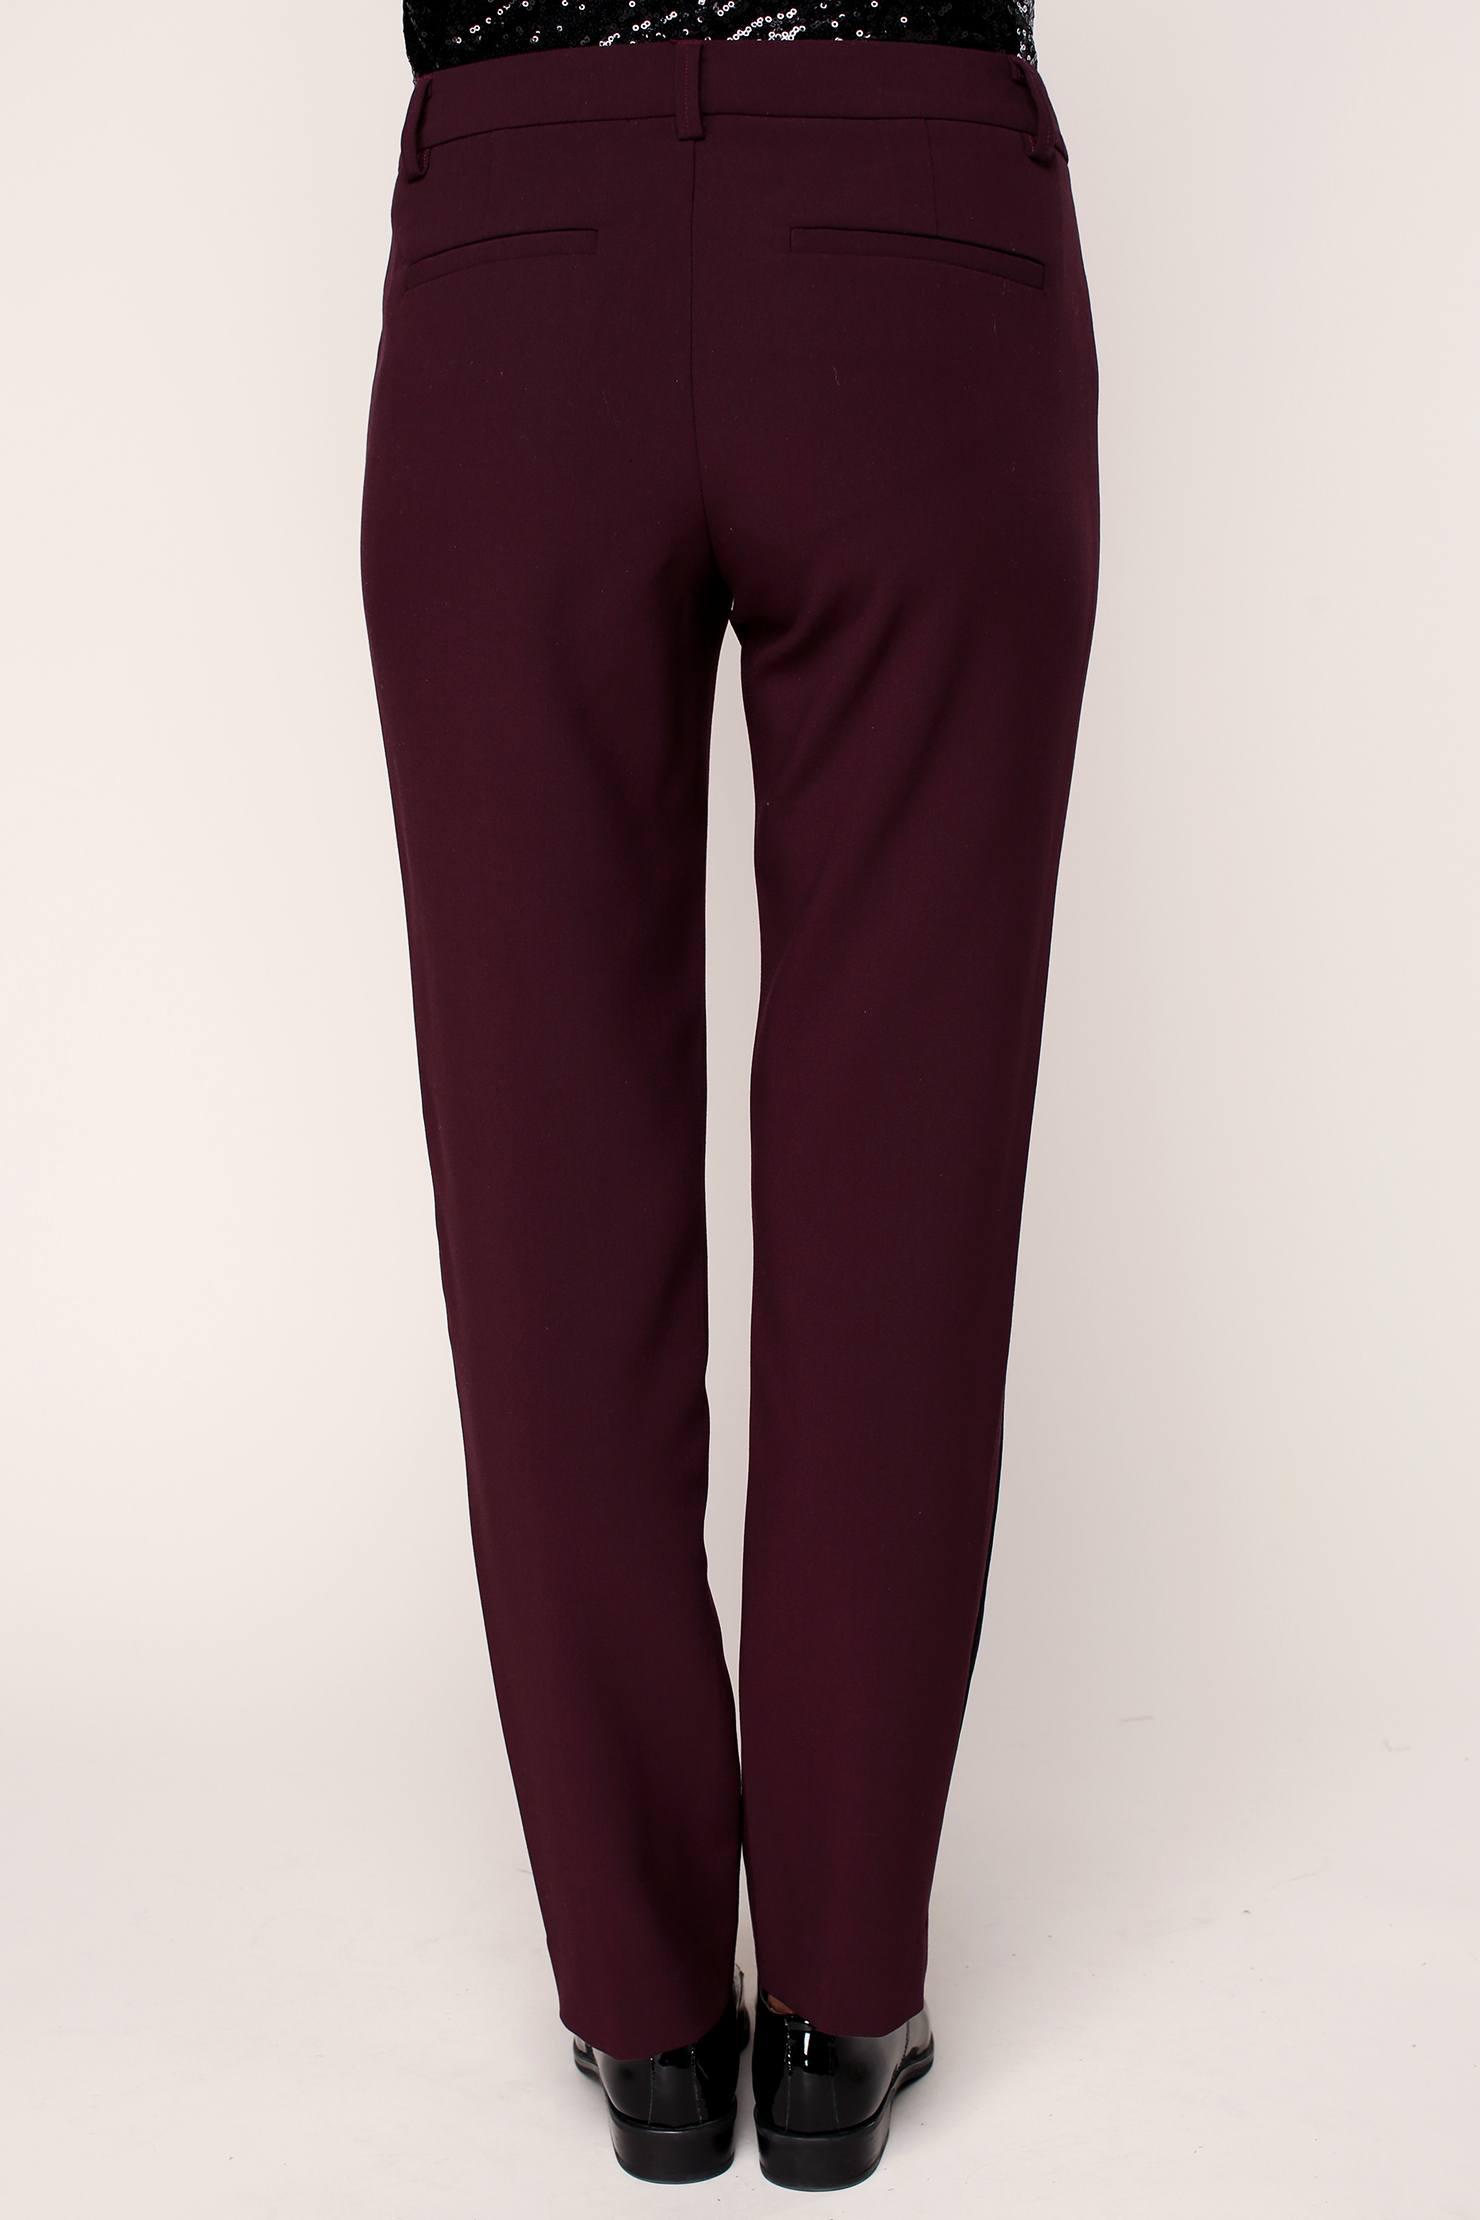 Lyst - Mkt Studio Straight-cut Trousers in Red